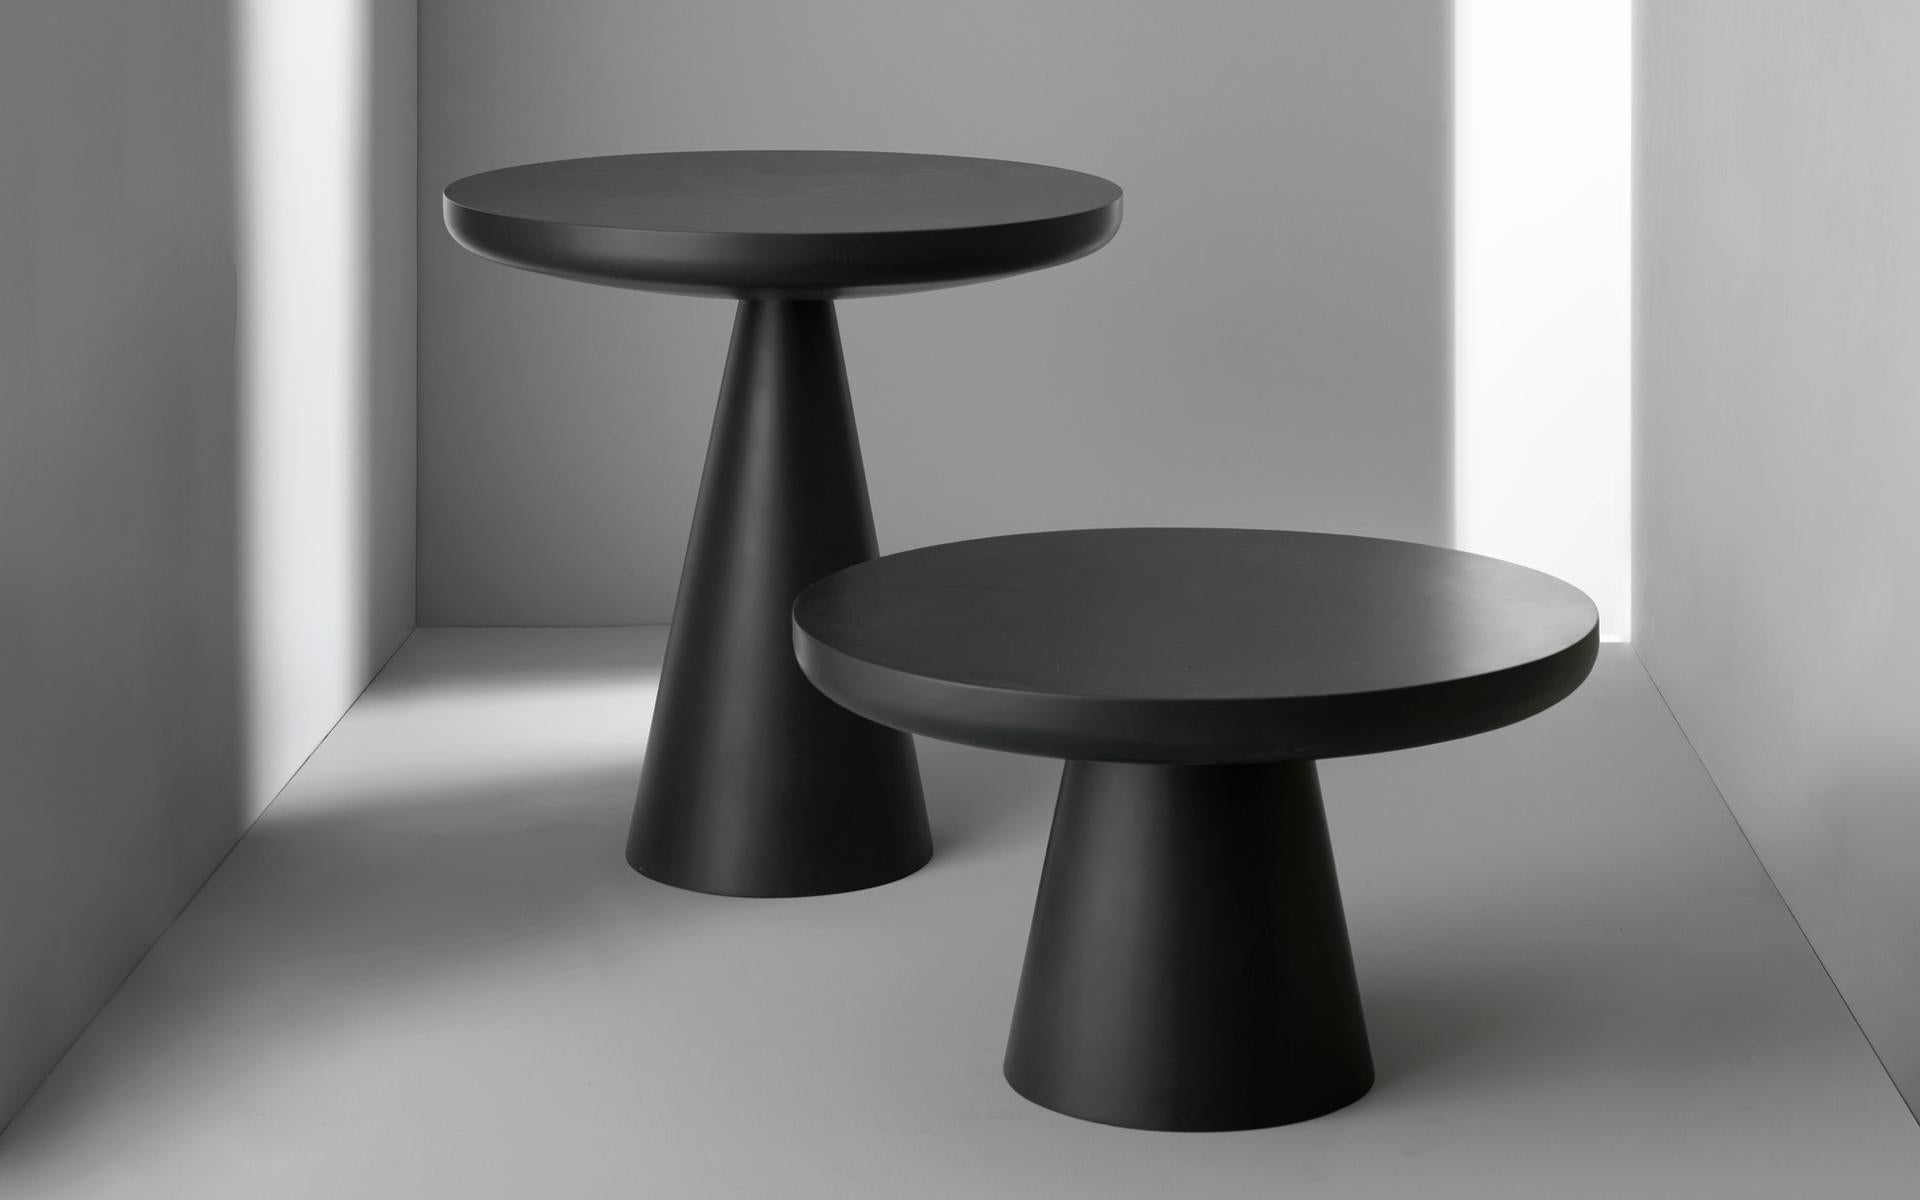 Pair of miss table by Imperfettolab
Dimensions: 
Ø 84 x H 51 cm
Ø 49 x H 98 cm
Materials: Fiberglass

Imperfetto Lab
Who we are ? We are a family.
Verter Turroni, Emanuela Ravelli and our children Elia, Margherita and Eusebio.
All together,